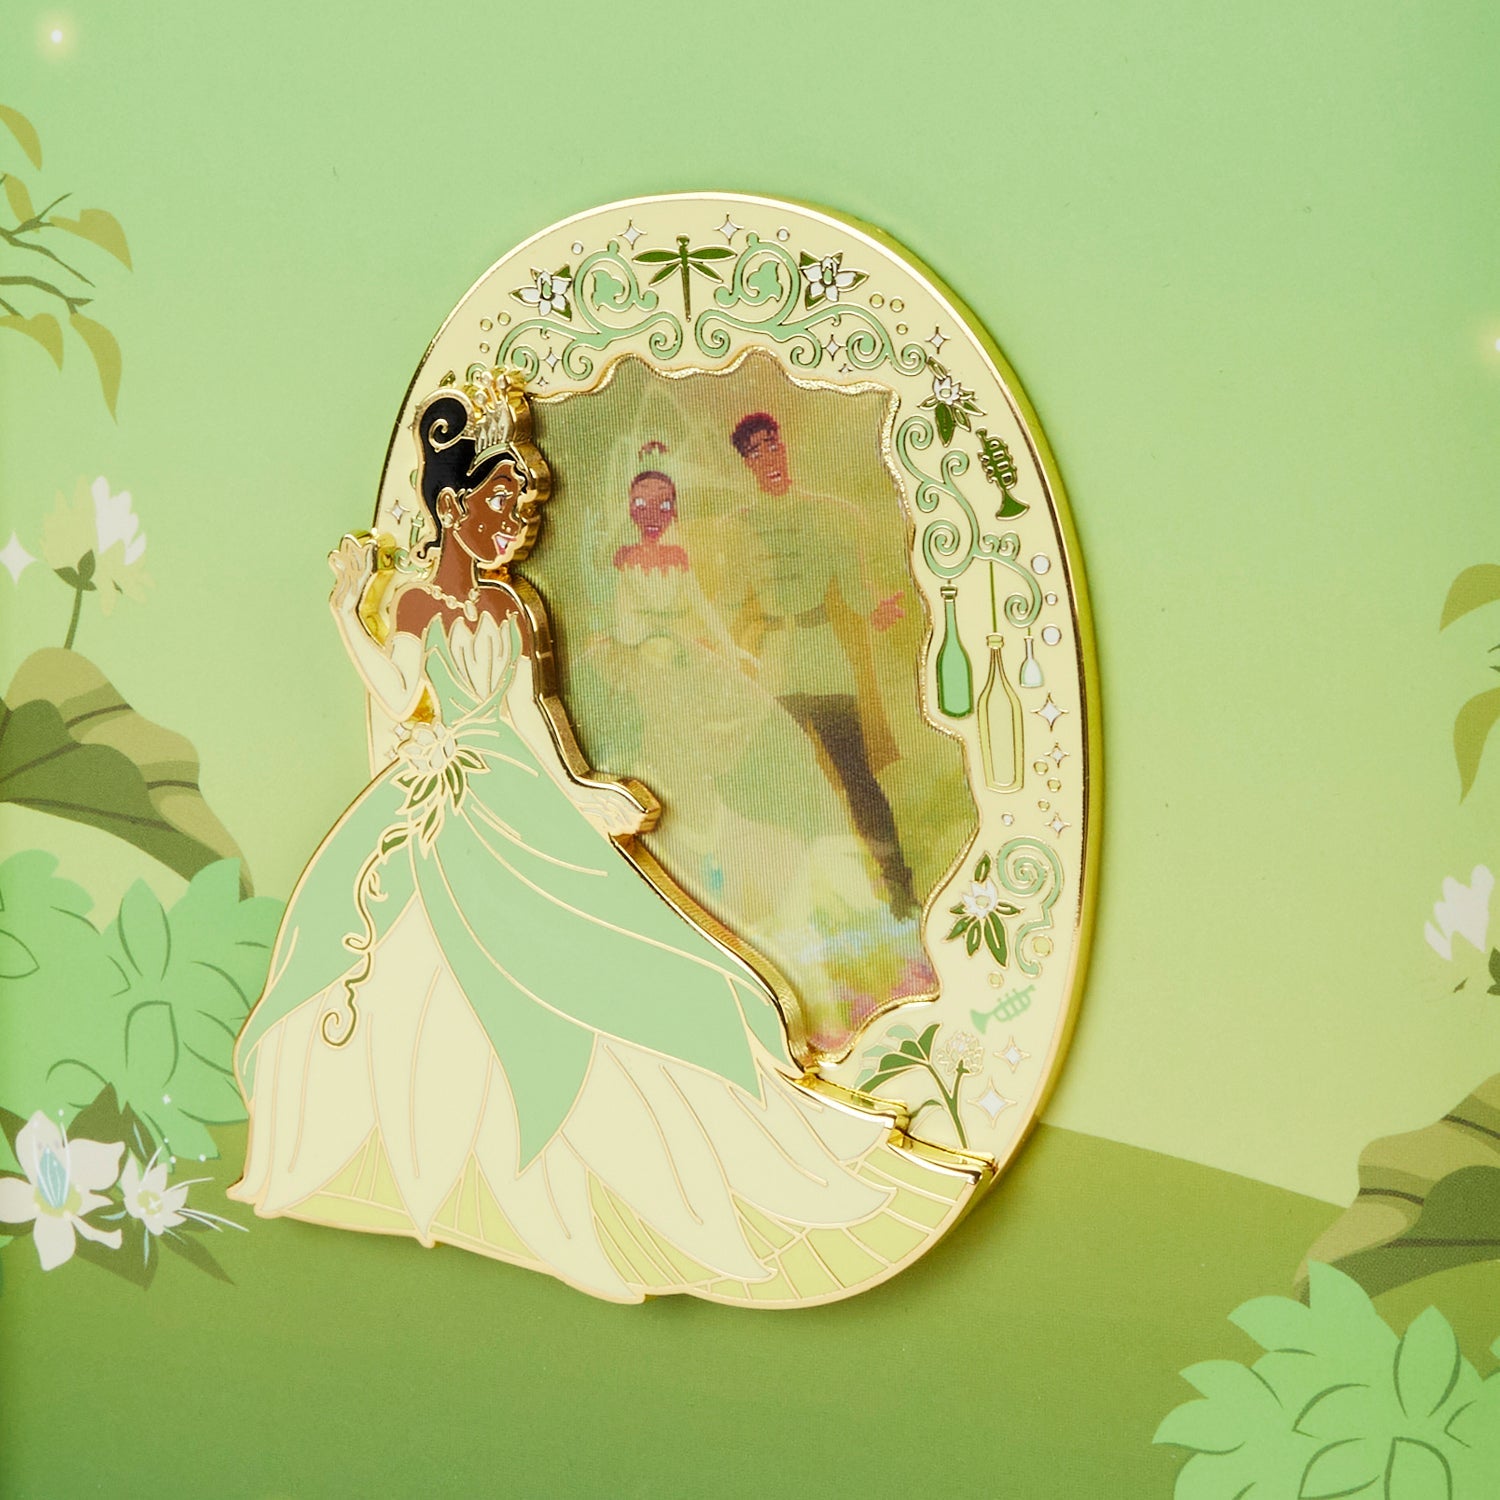 Loungefly x Disney Princess and The Frog Princess Tiana Lenticular 3 - Inch Pin - GeekCore